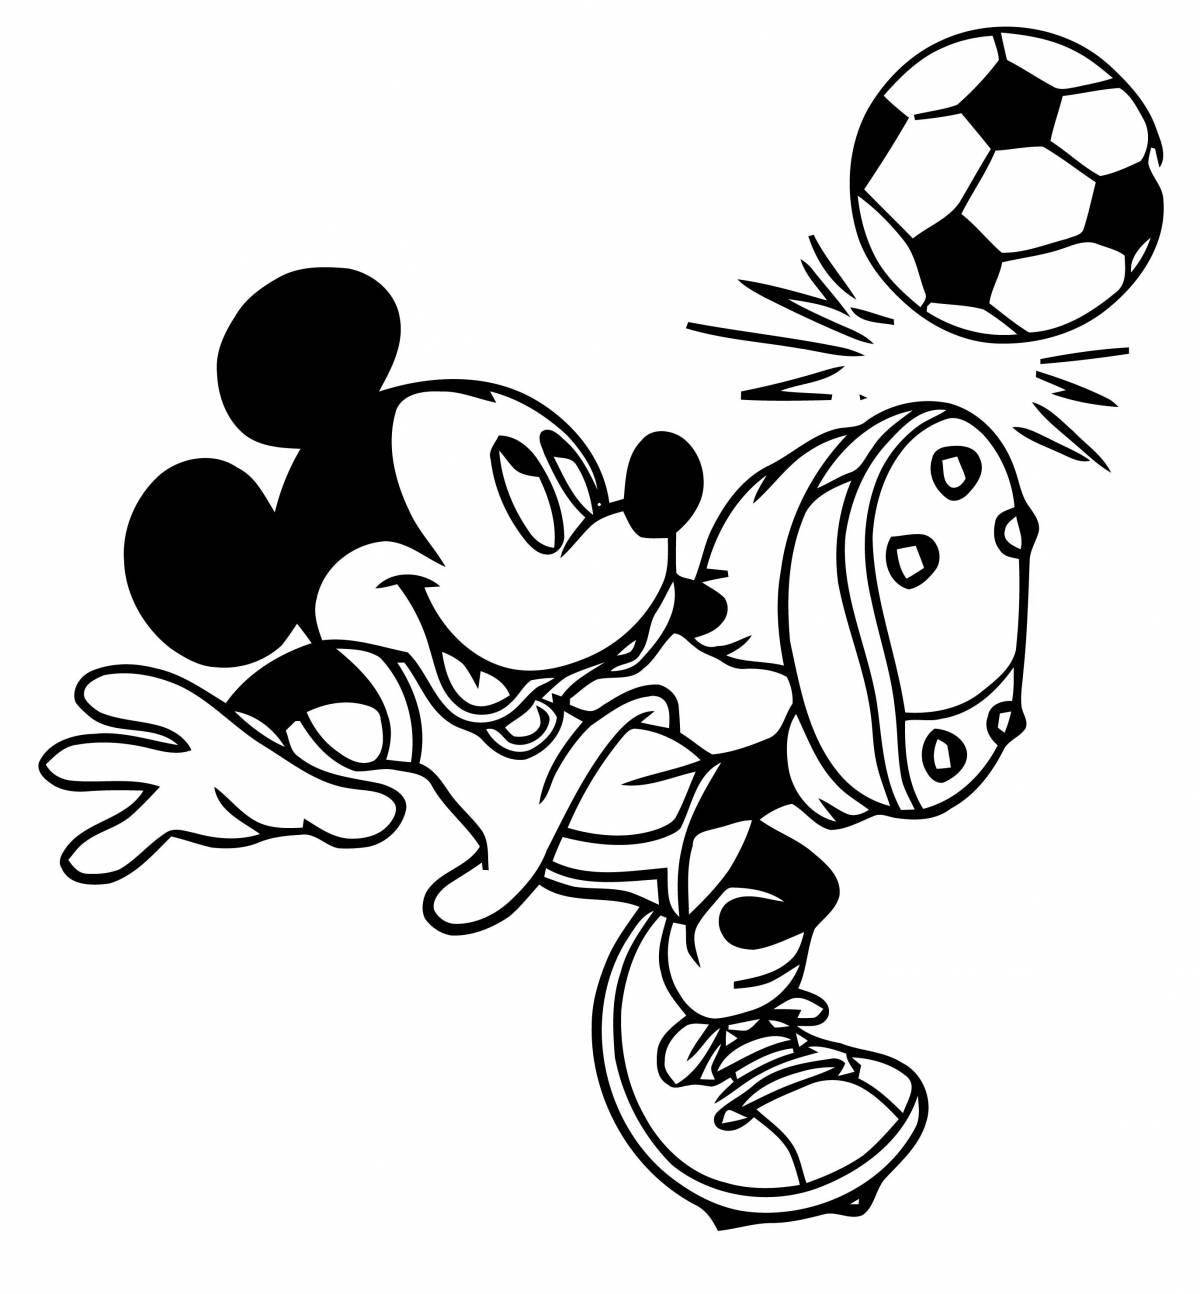 Fantastic mickey mouse games